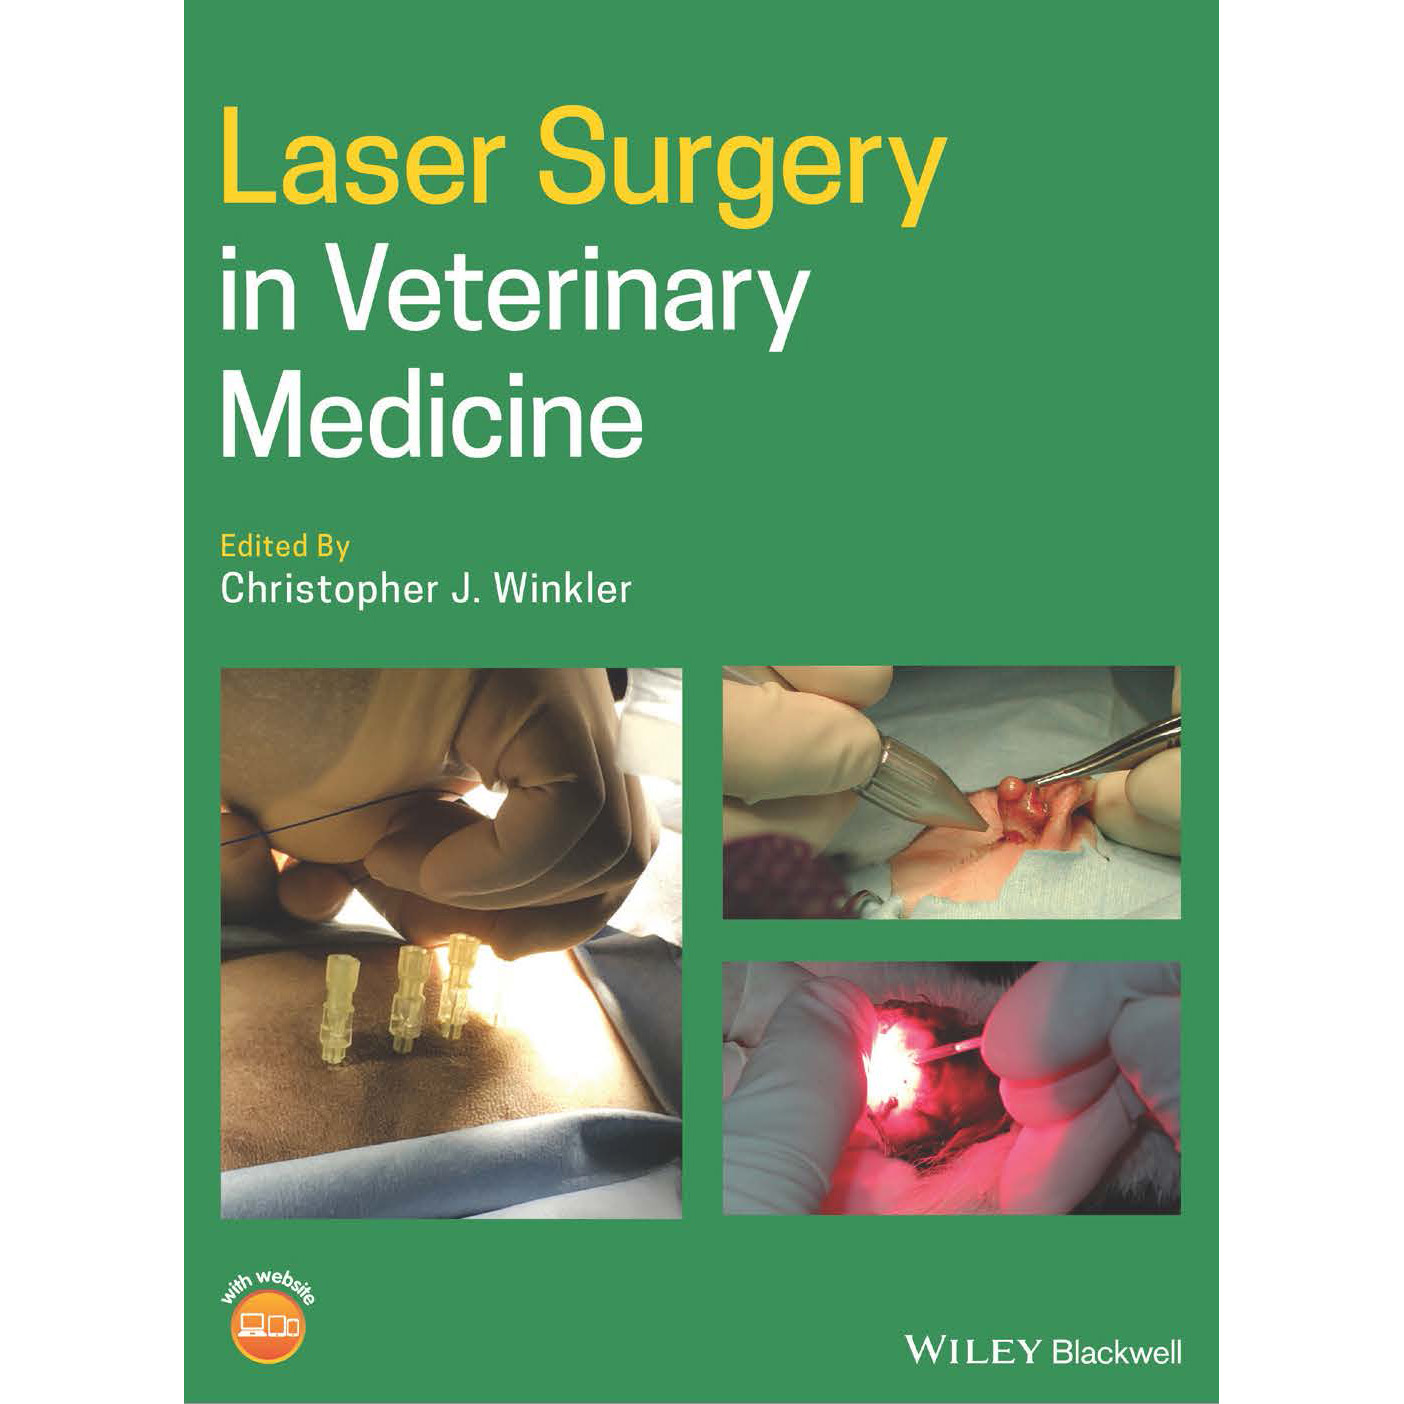 Dr. Brooke Burkhalter Authors Chapter in Book Laser Surgery in Veterinary Medicine